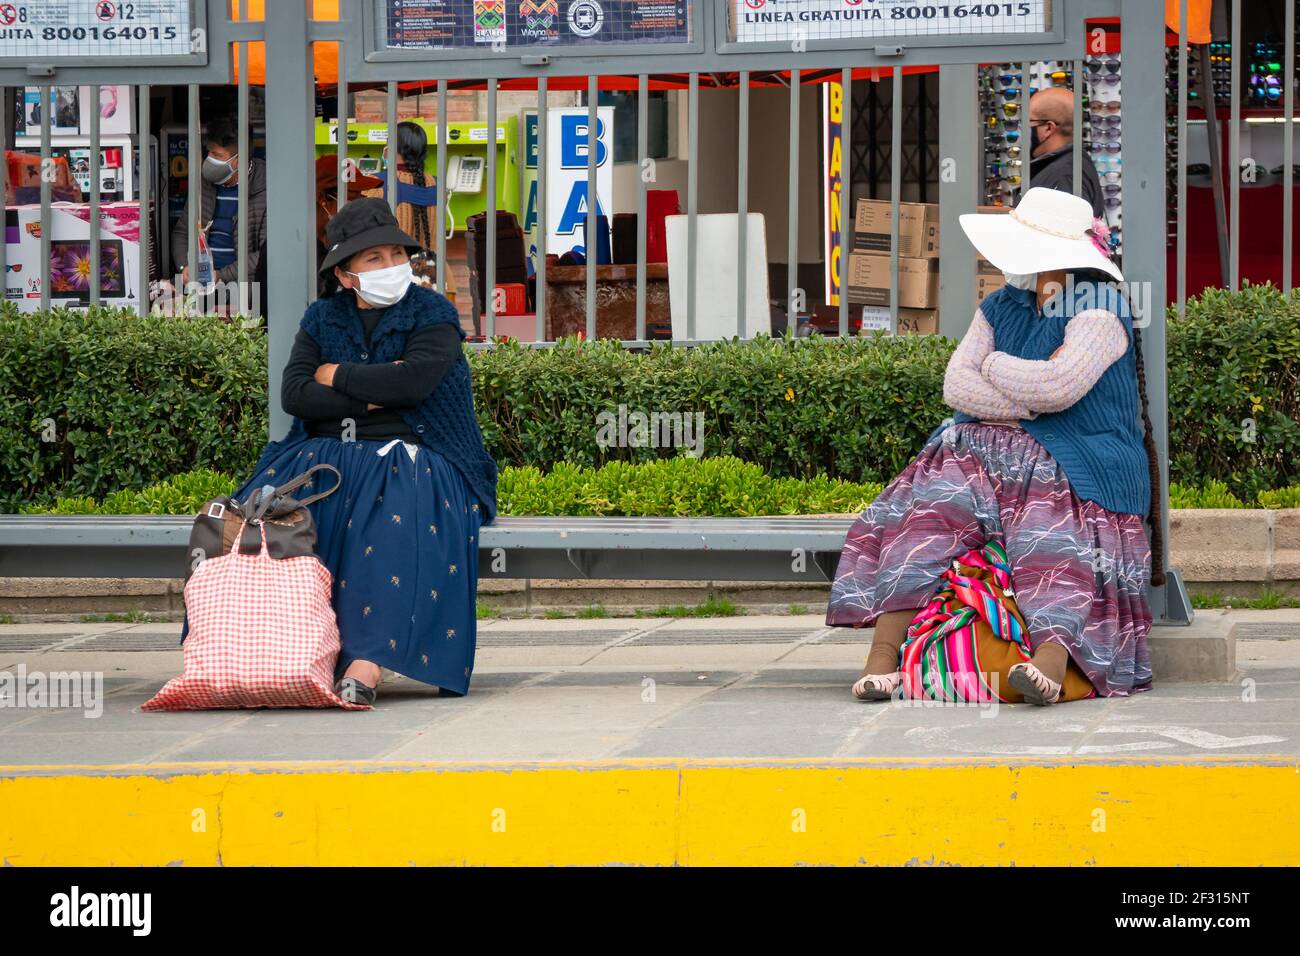 El Alto, La Paz, Bolivia - February 11 2021: Bolivian Indigenous Women Known as 'Cholitas', Sitting on a Bench one Meter Away From Each other While We Stock Photo